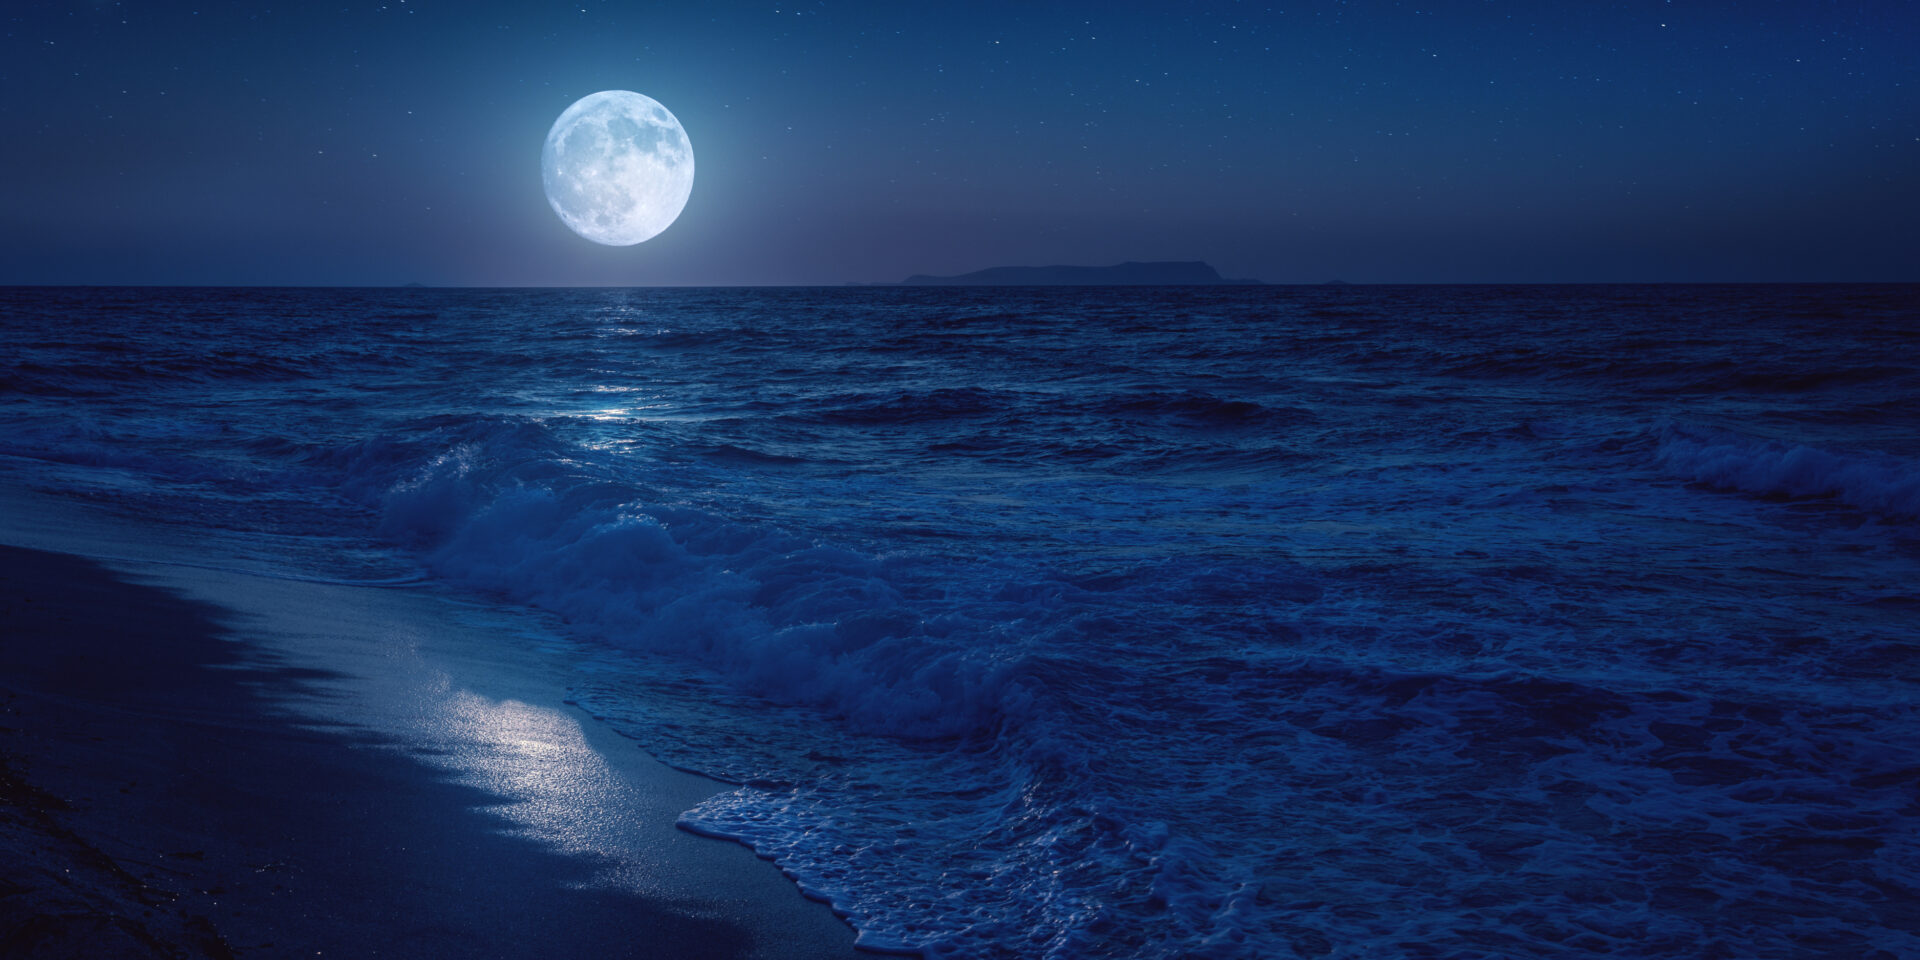 Do you know why the moon has a strong influence on the tides?